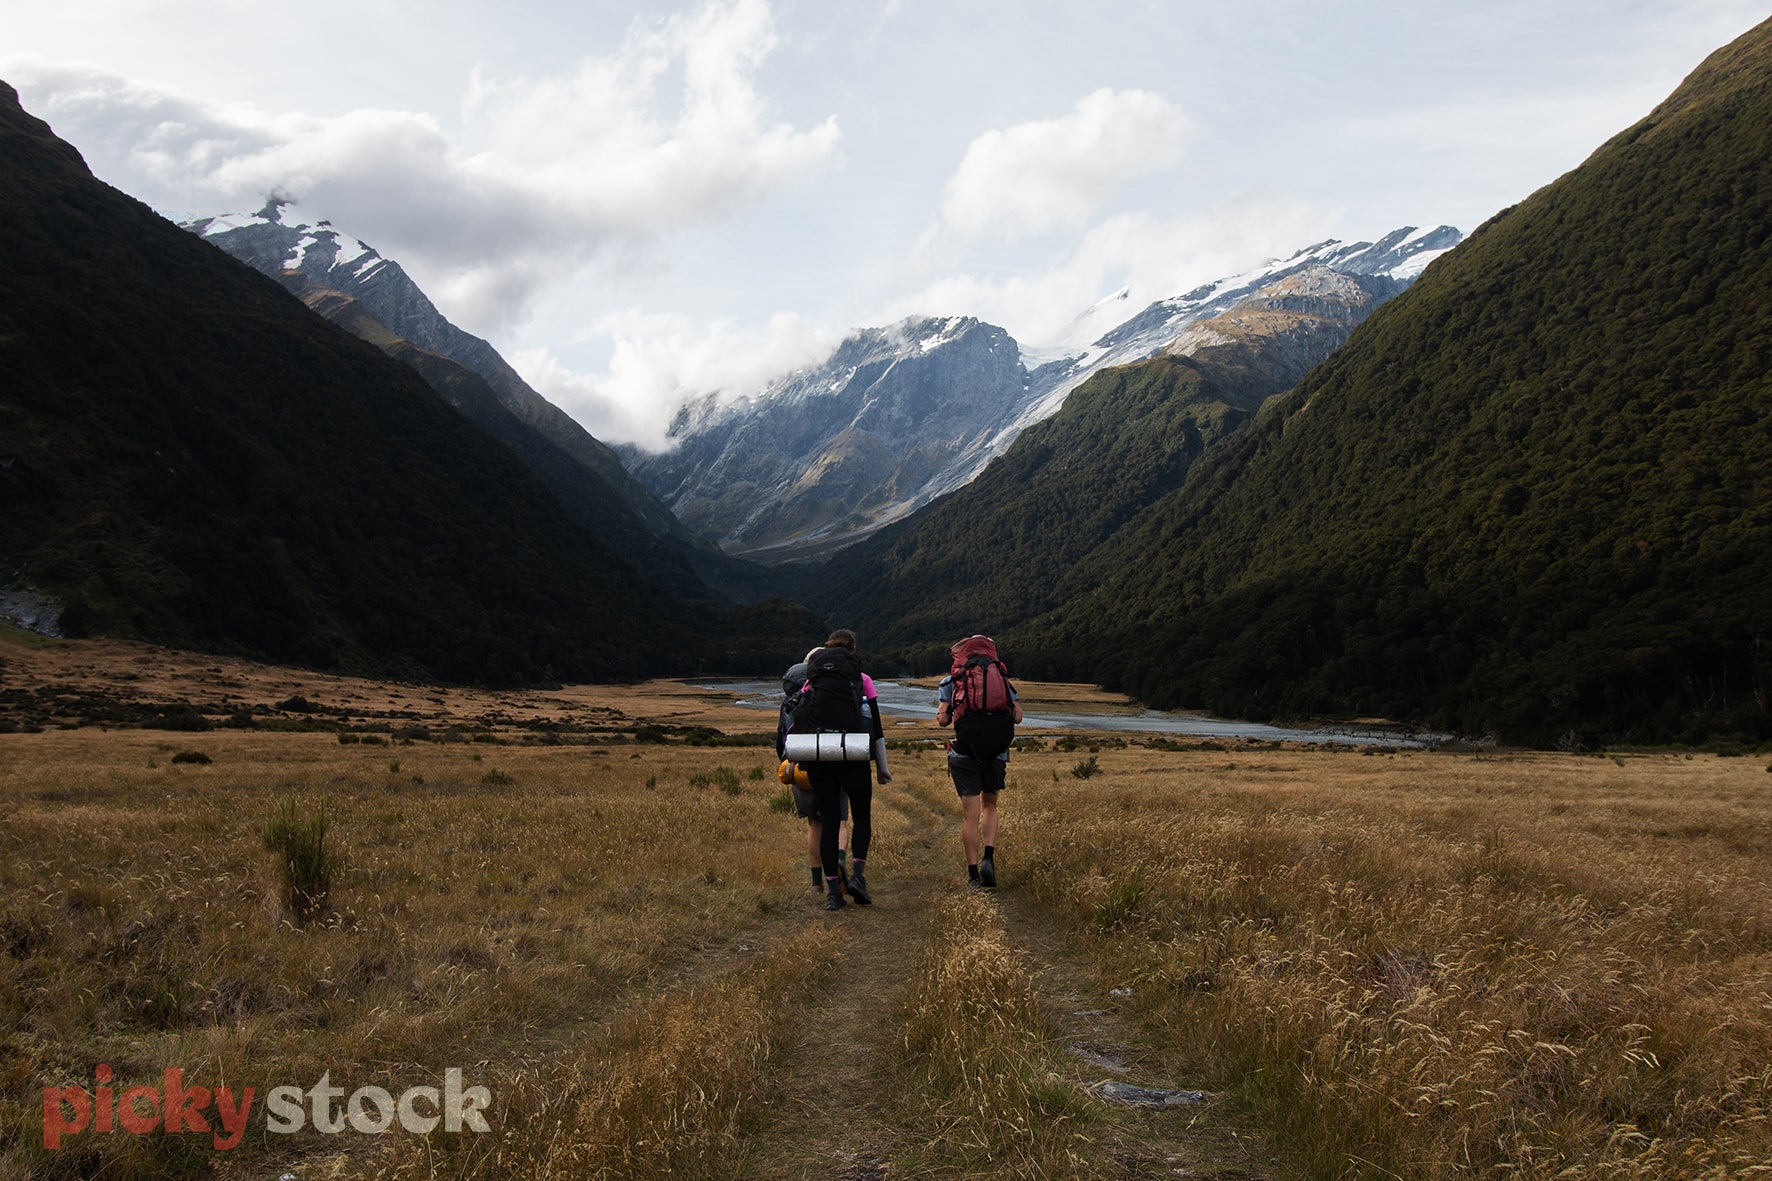 Two friends walking through the valley on a hike / tramp. Both carrying large packs, with a grey sleep mat attached. Walking through valley towards small river with mountain view, meeting in the middle of frame. Grey overcast sky.